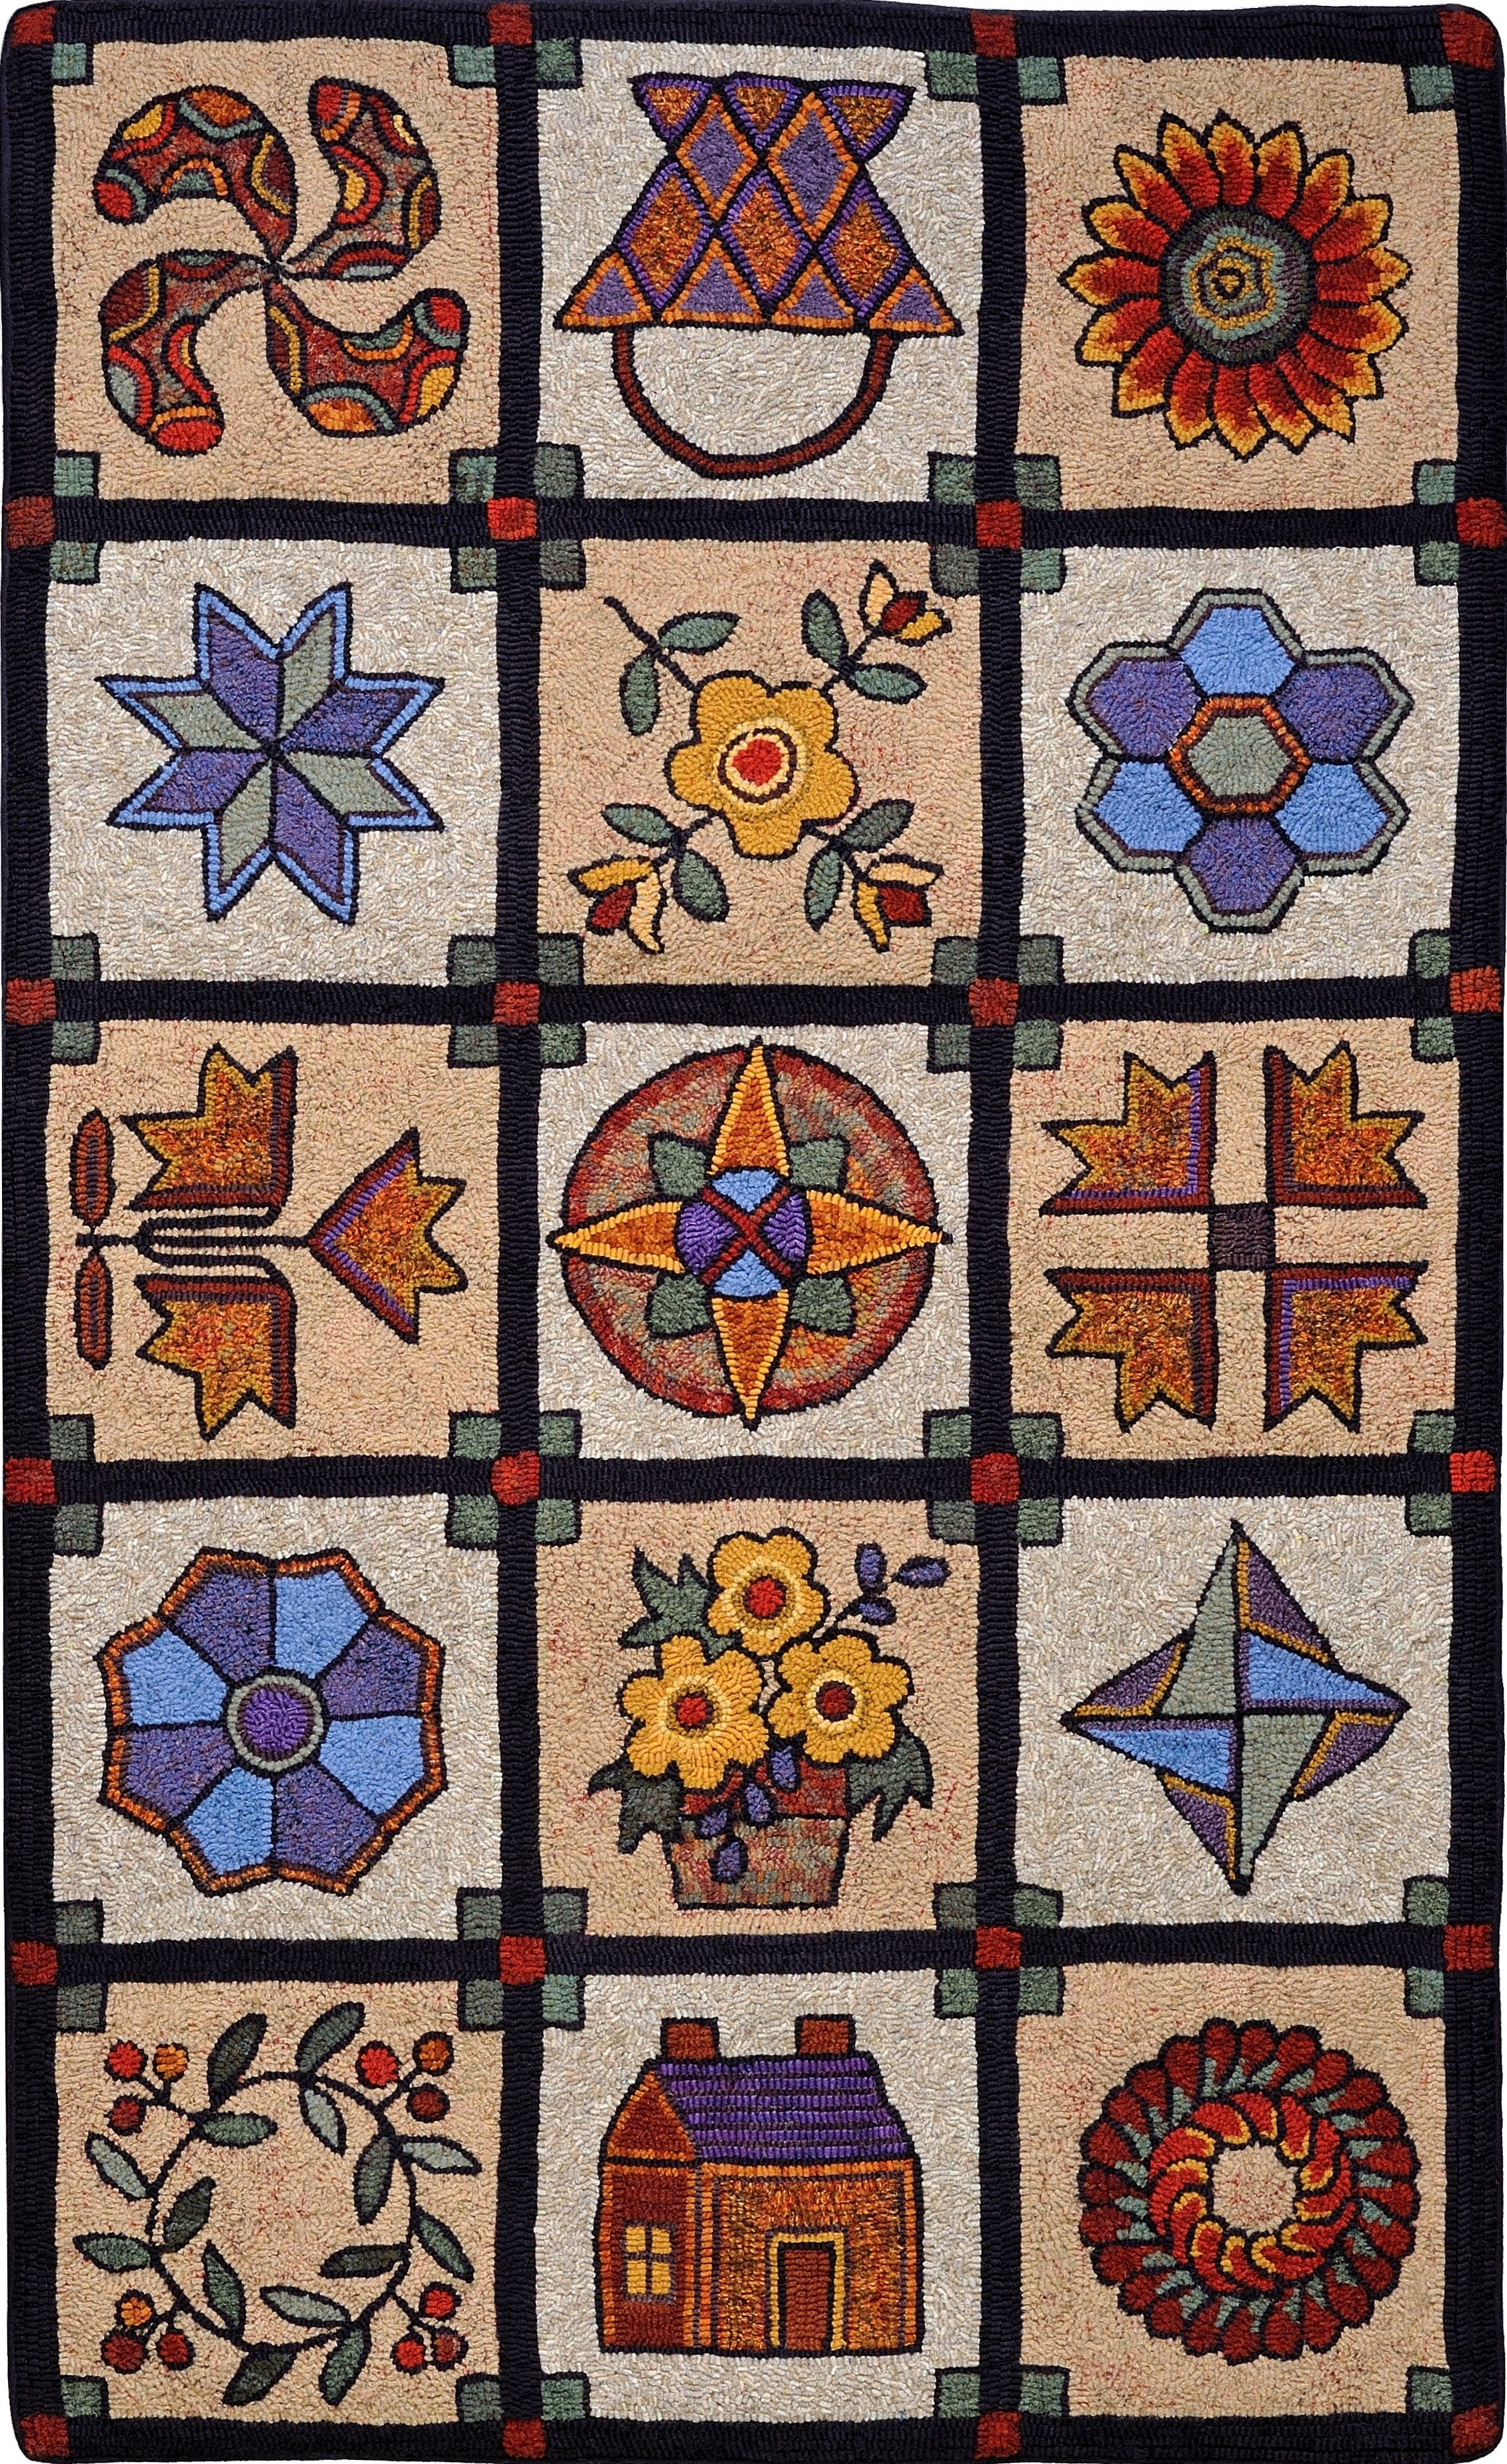 Quilt Inspired Rug Hooking Patterns